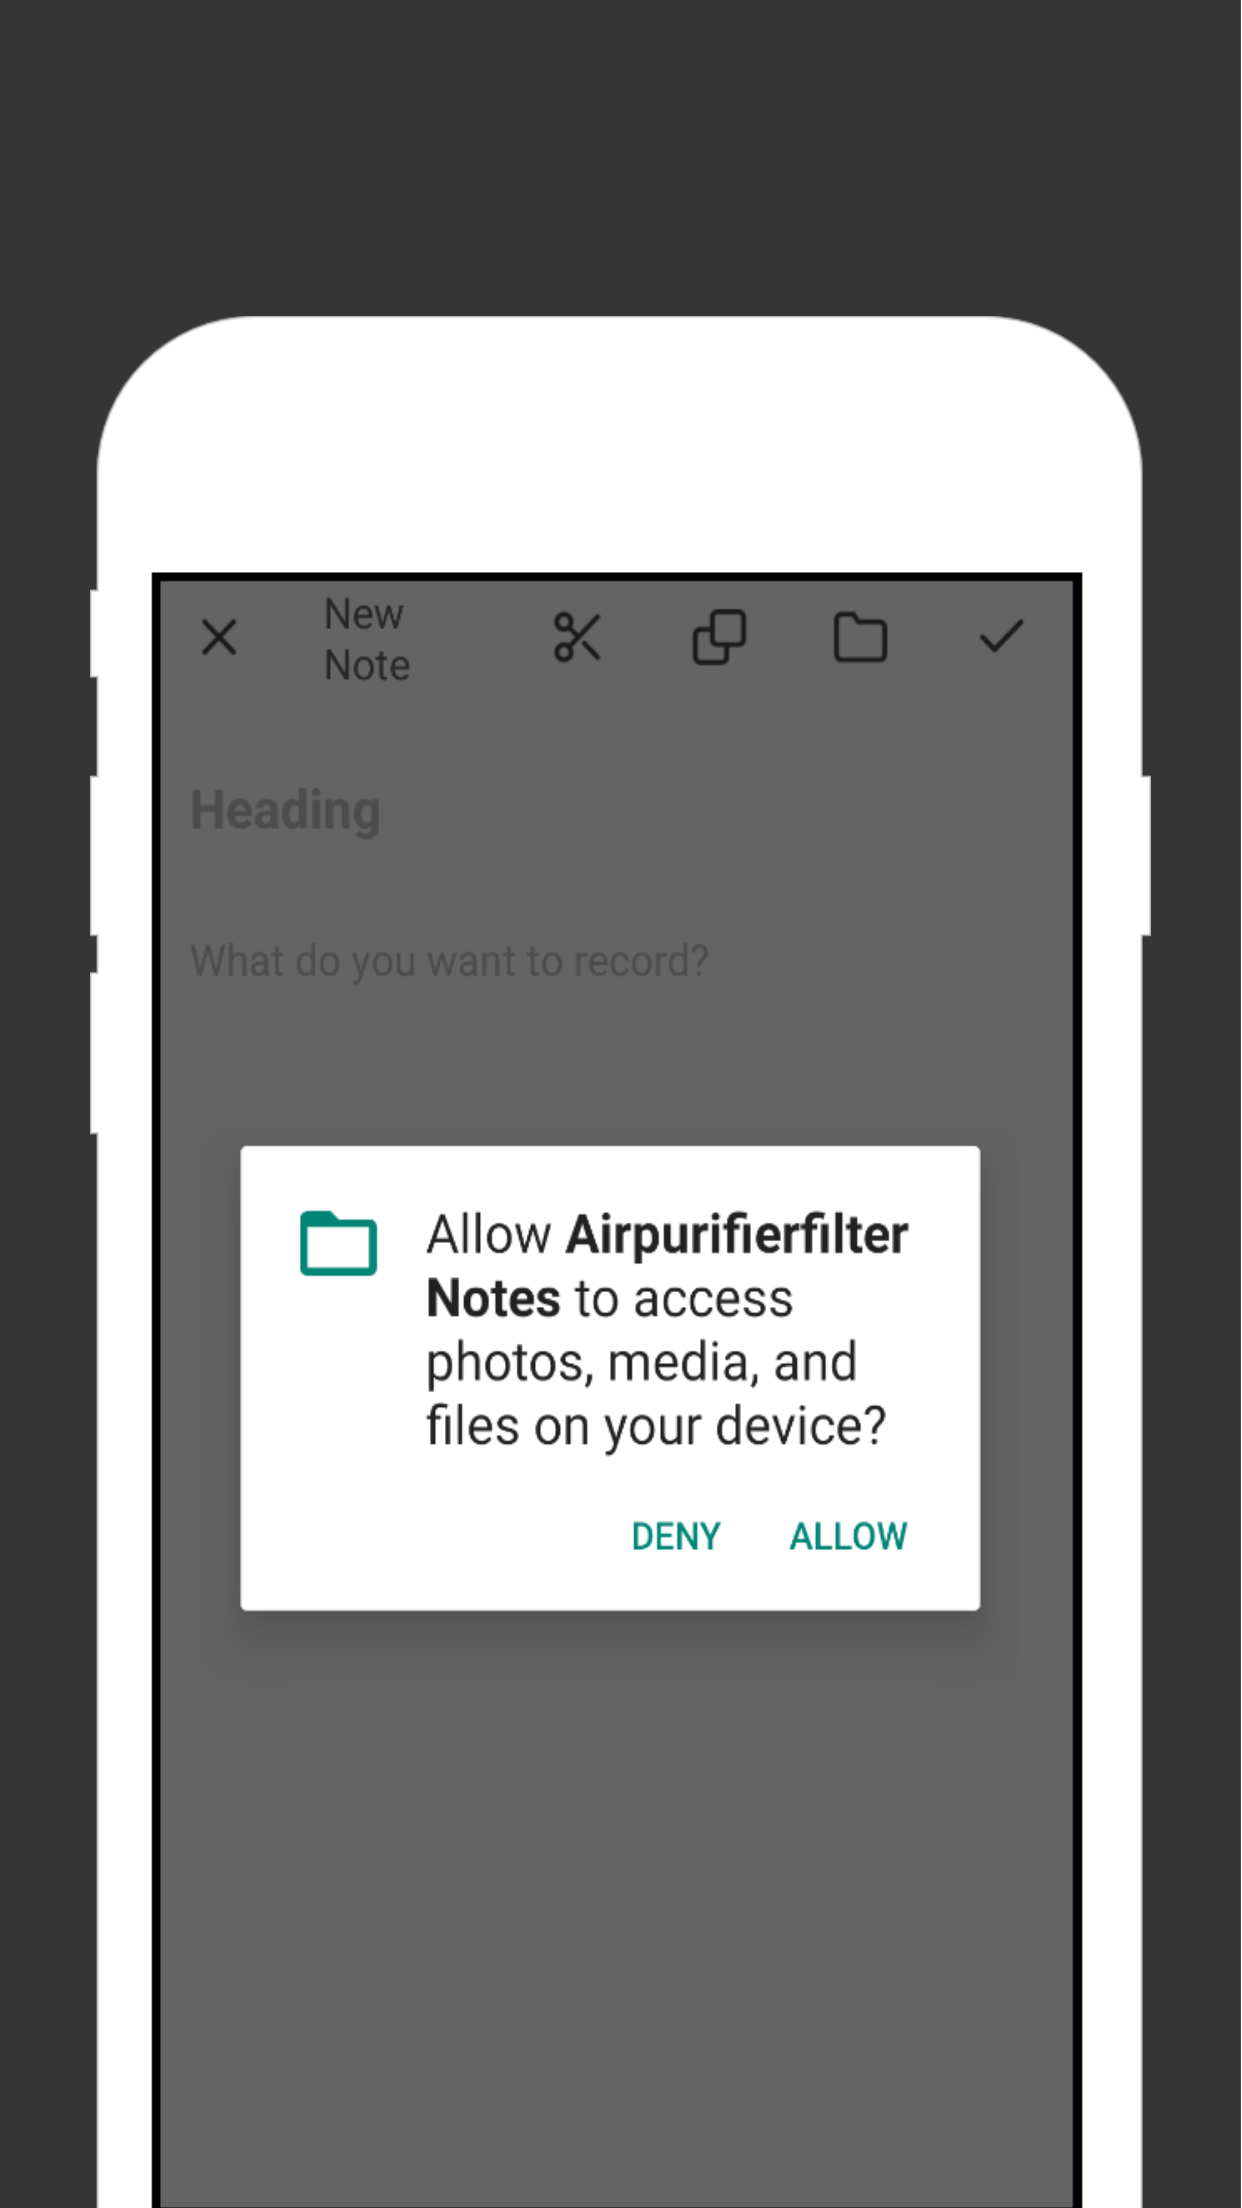 Airpurifierfilter Notes